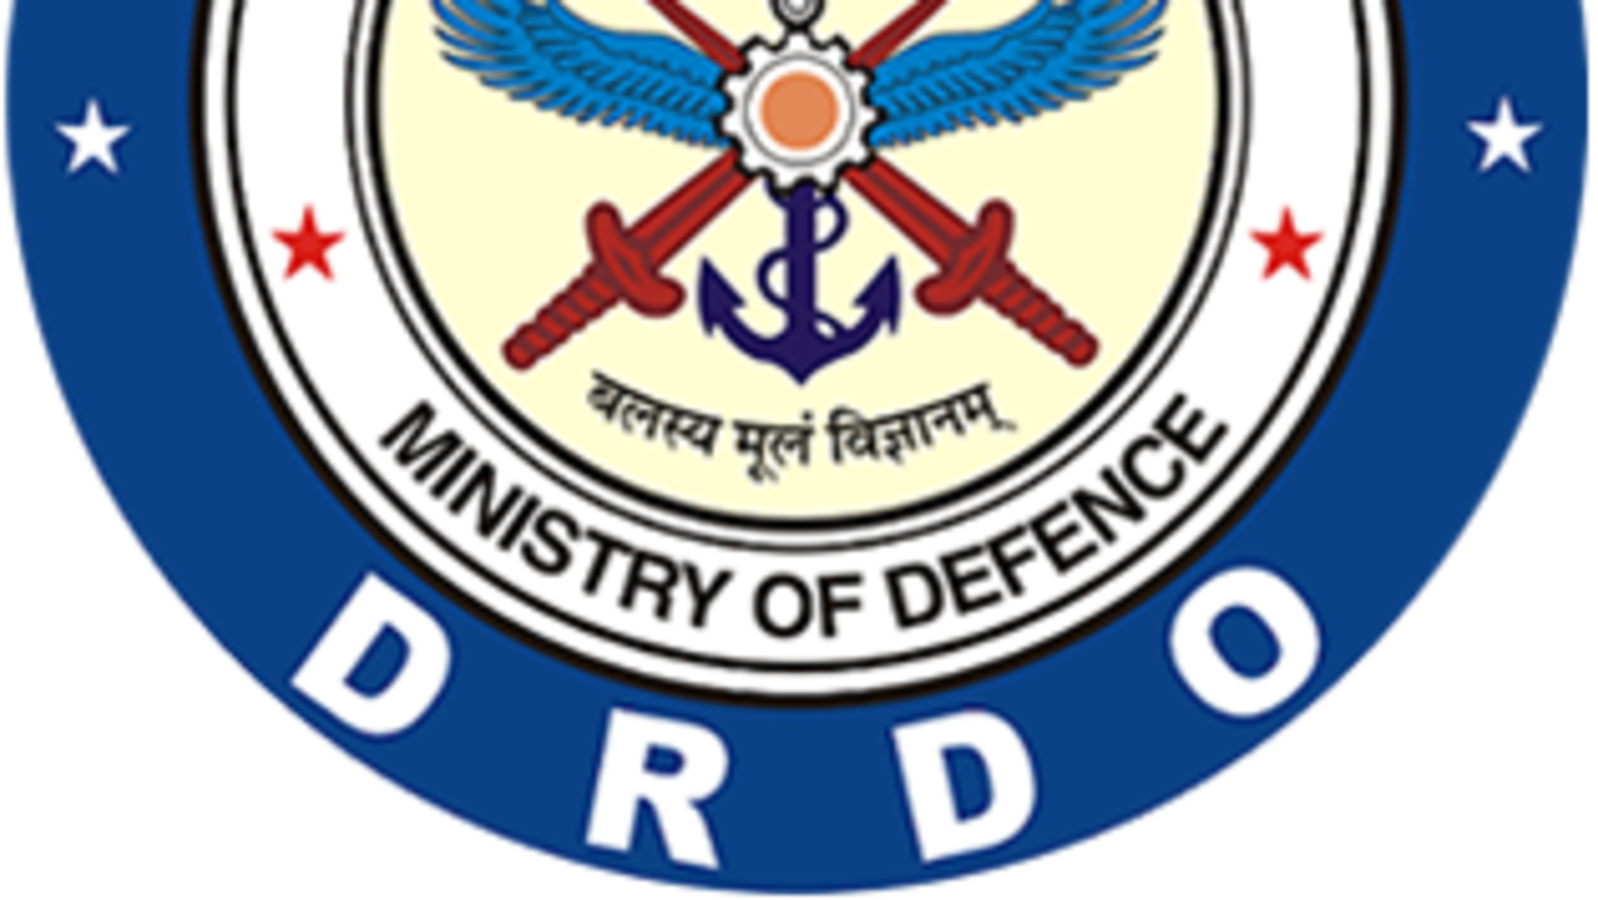 DRDO Walk-In 2024 Interview For Engineers | B.Tech/B.E./M.E./M.Tech/M.Sc. -  Engineers Required | Interview Date: 4th & 7th March 2024 - Engineering Hint